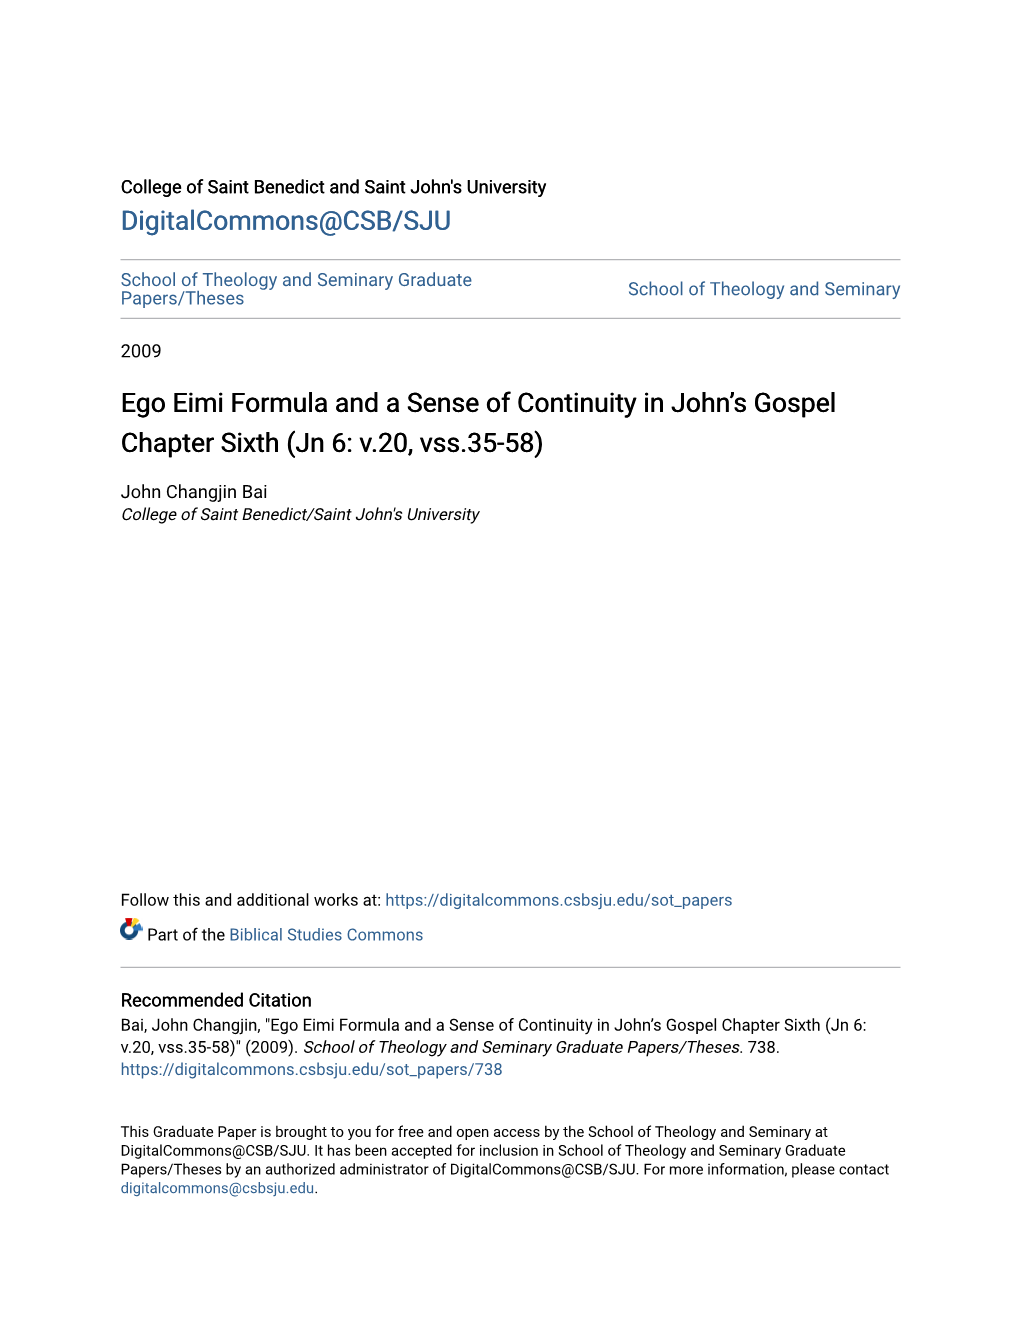 Ego Eimi Formula and a Sense of Continuity in John's Gospel Chapter